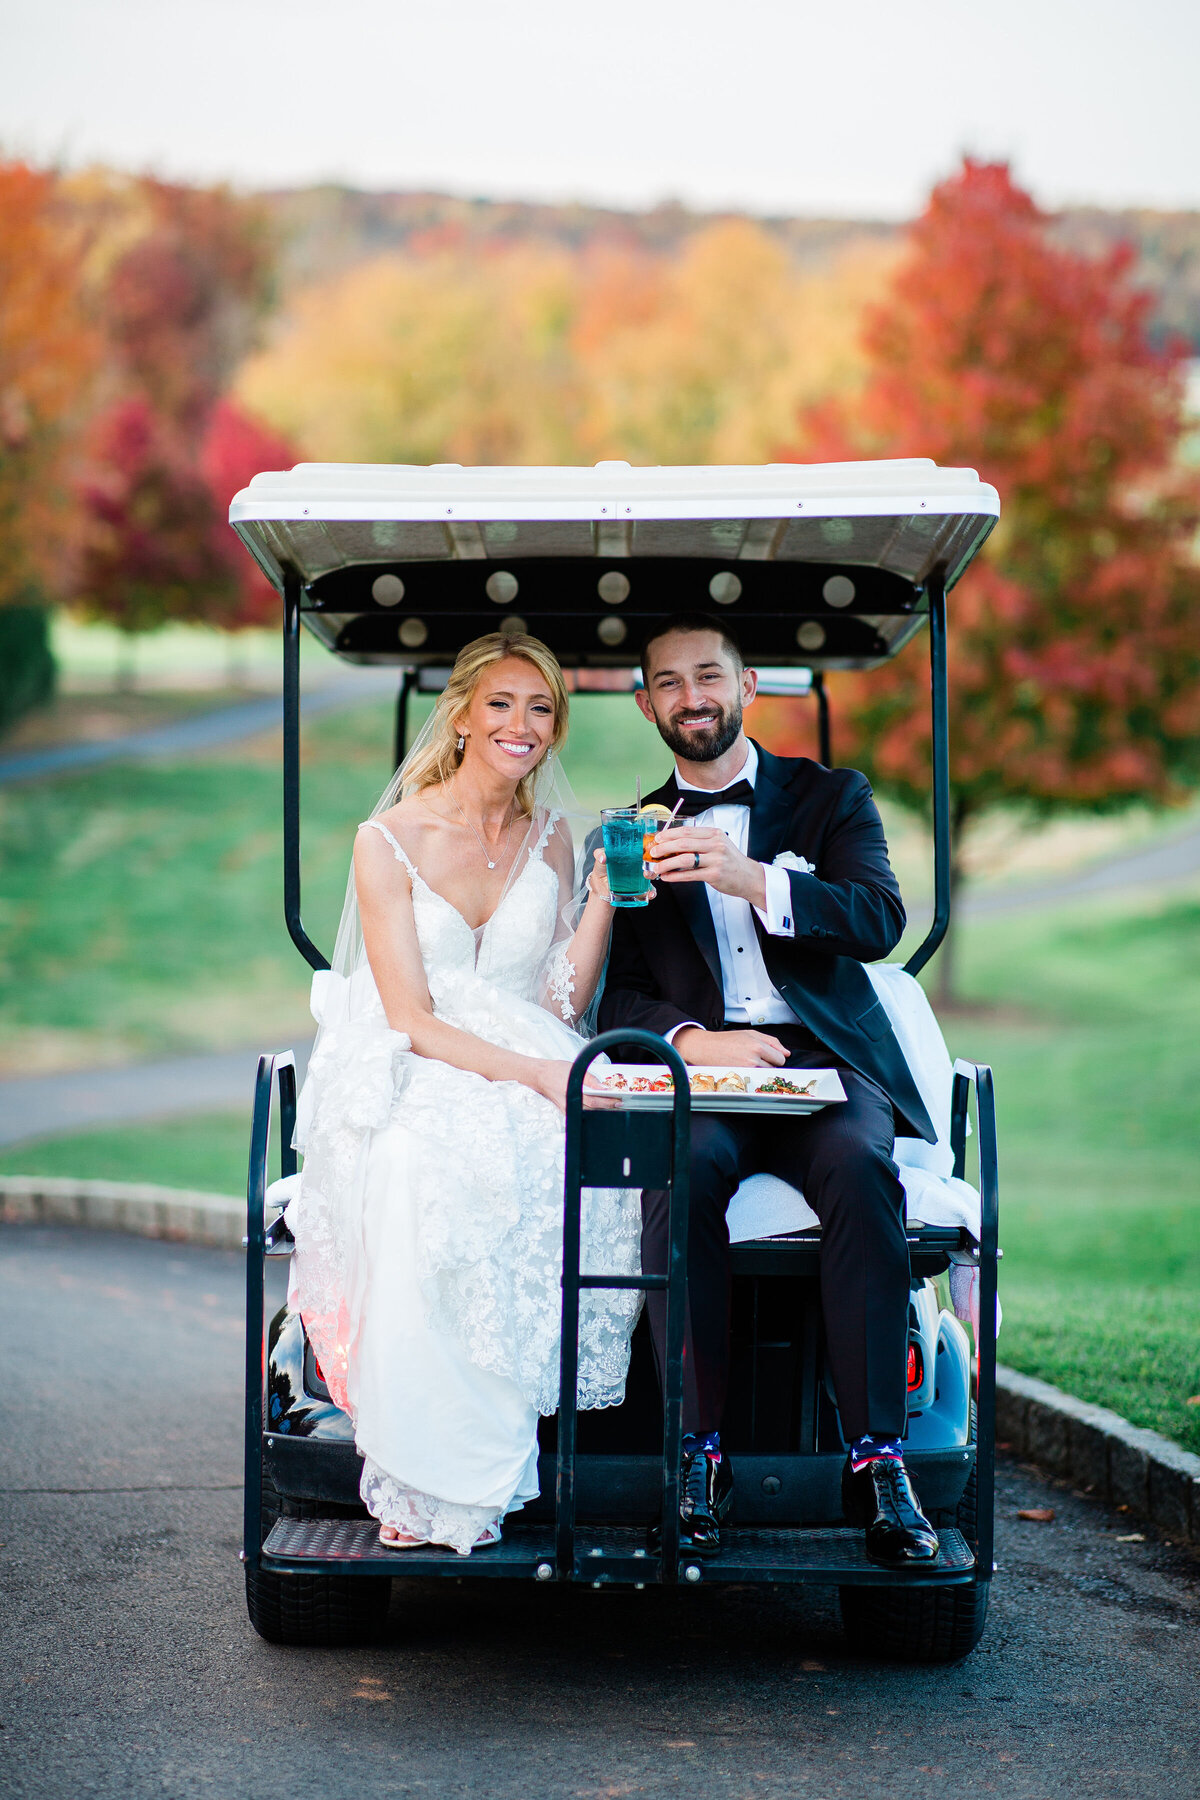 unique wedding poses bride and groom on golf cart Catesby Farm Estate